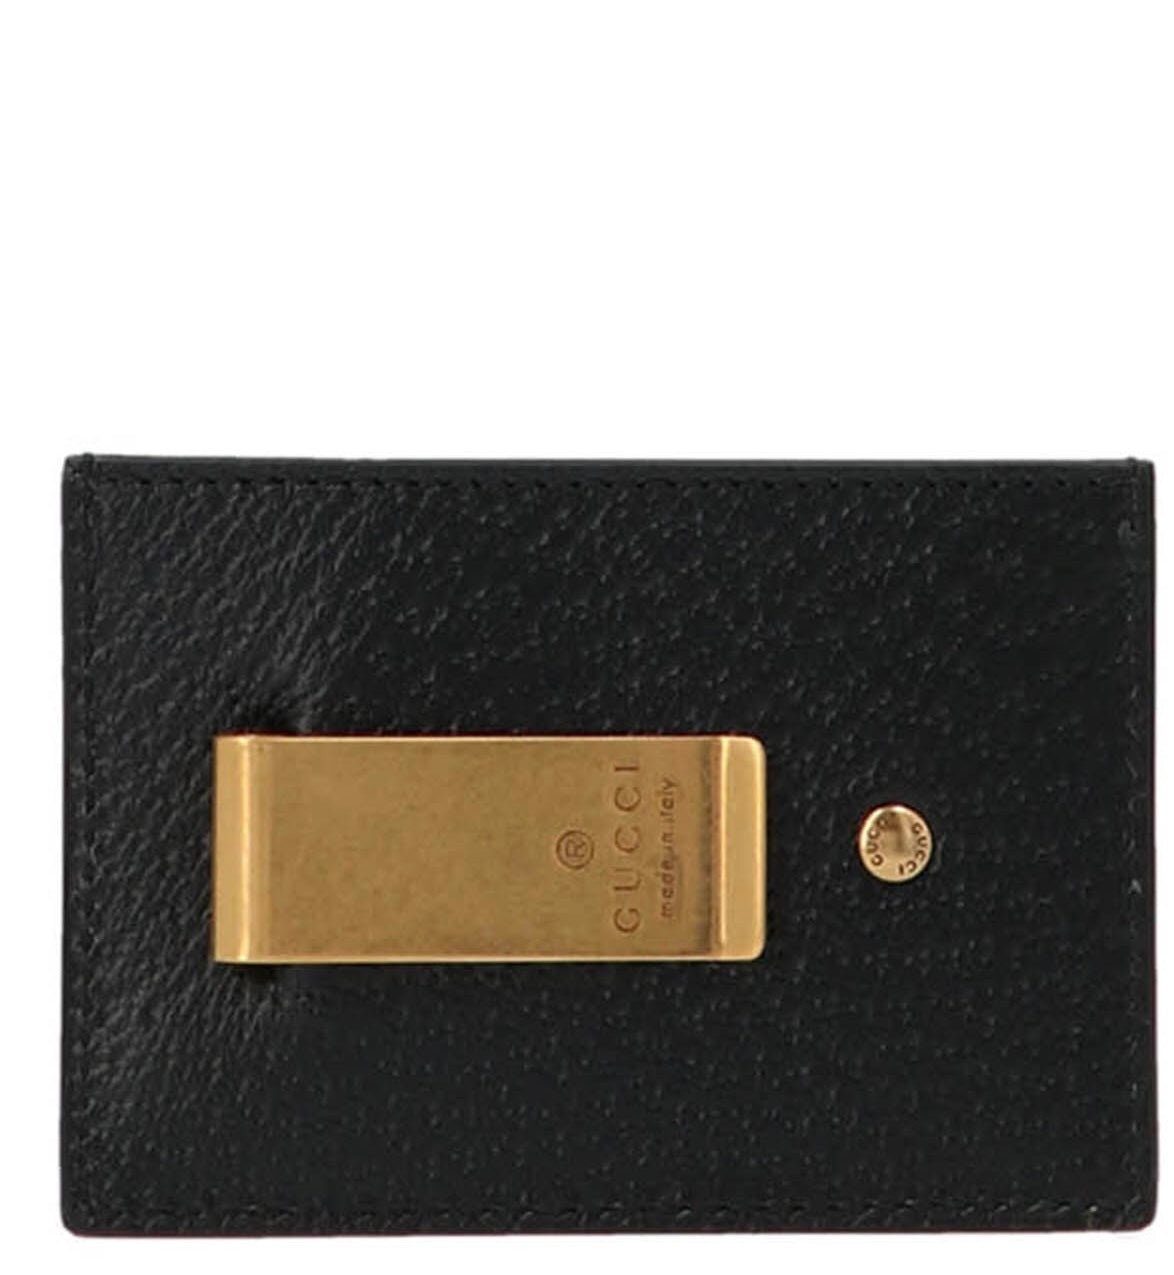 GUCCI GG MARMONT LEATHER CARD HOLDER - 2